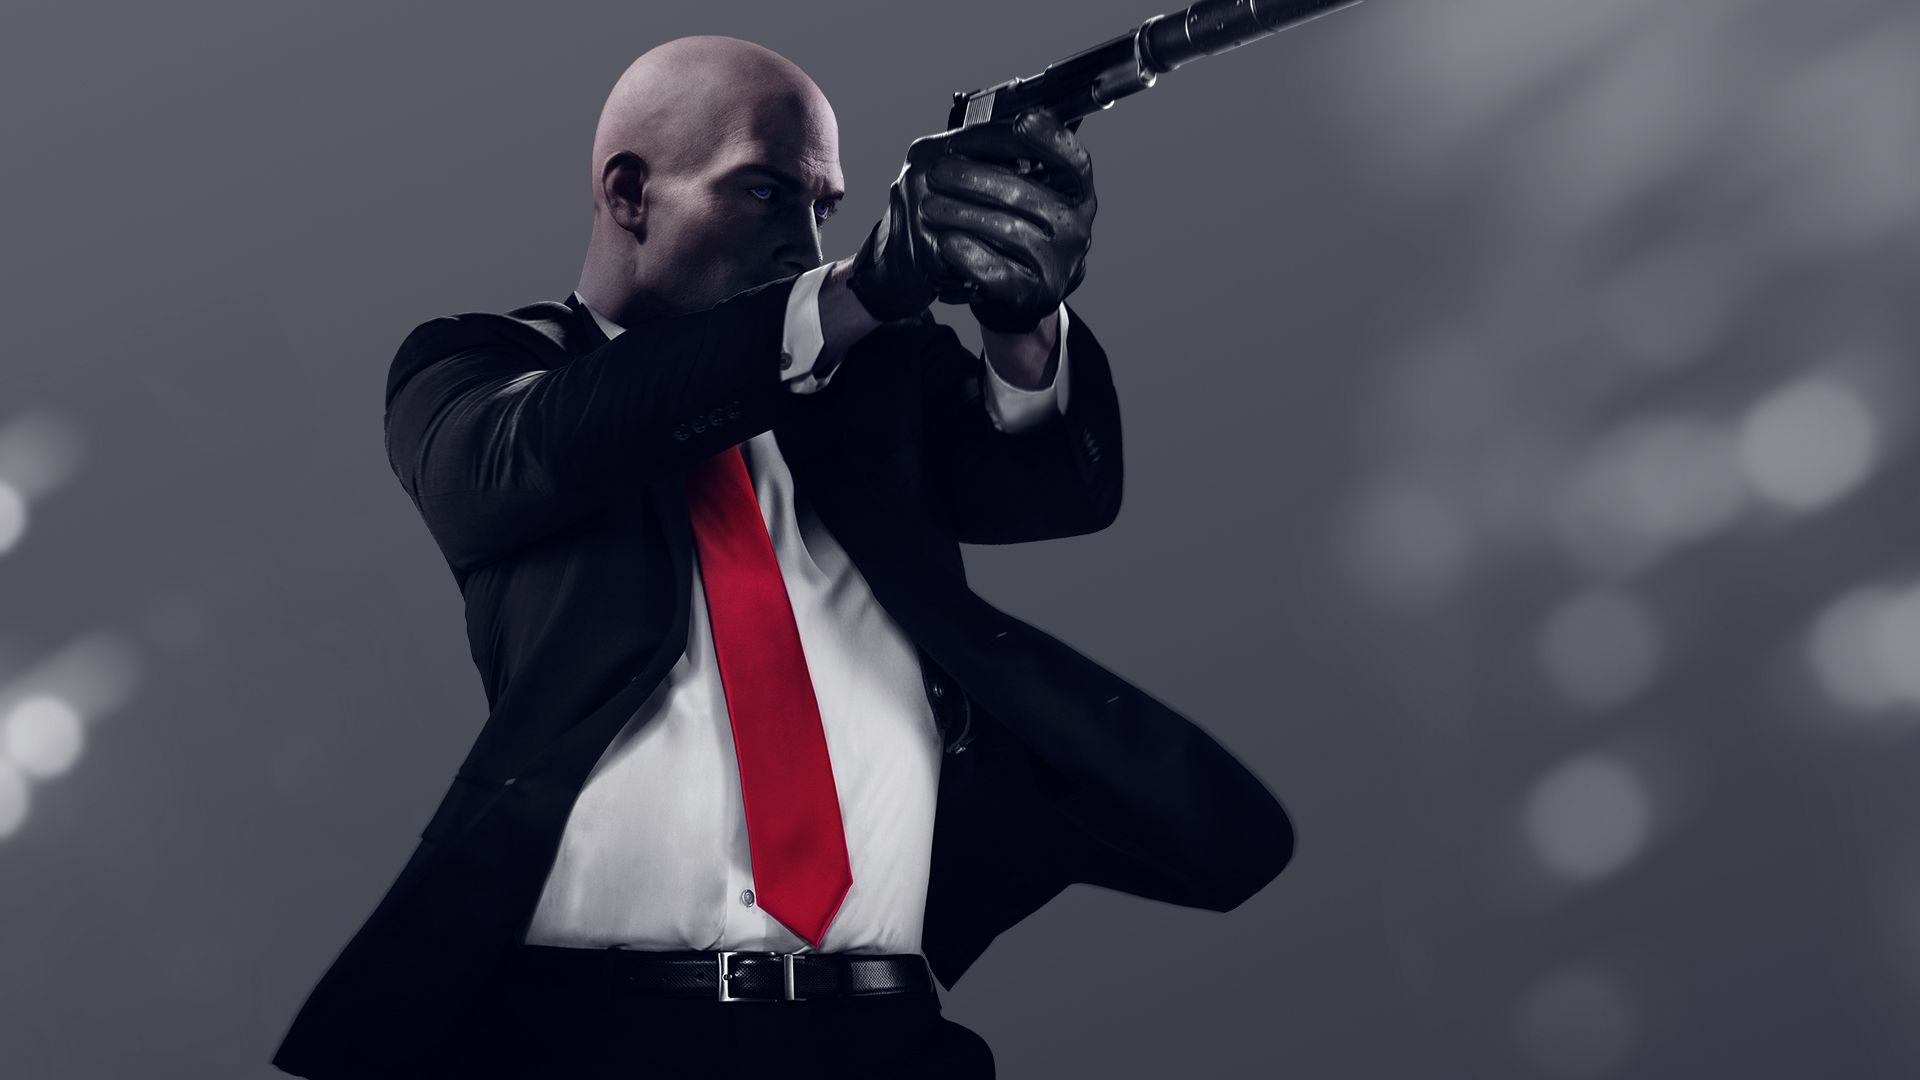 download hitman mobile for free